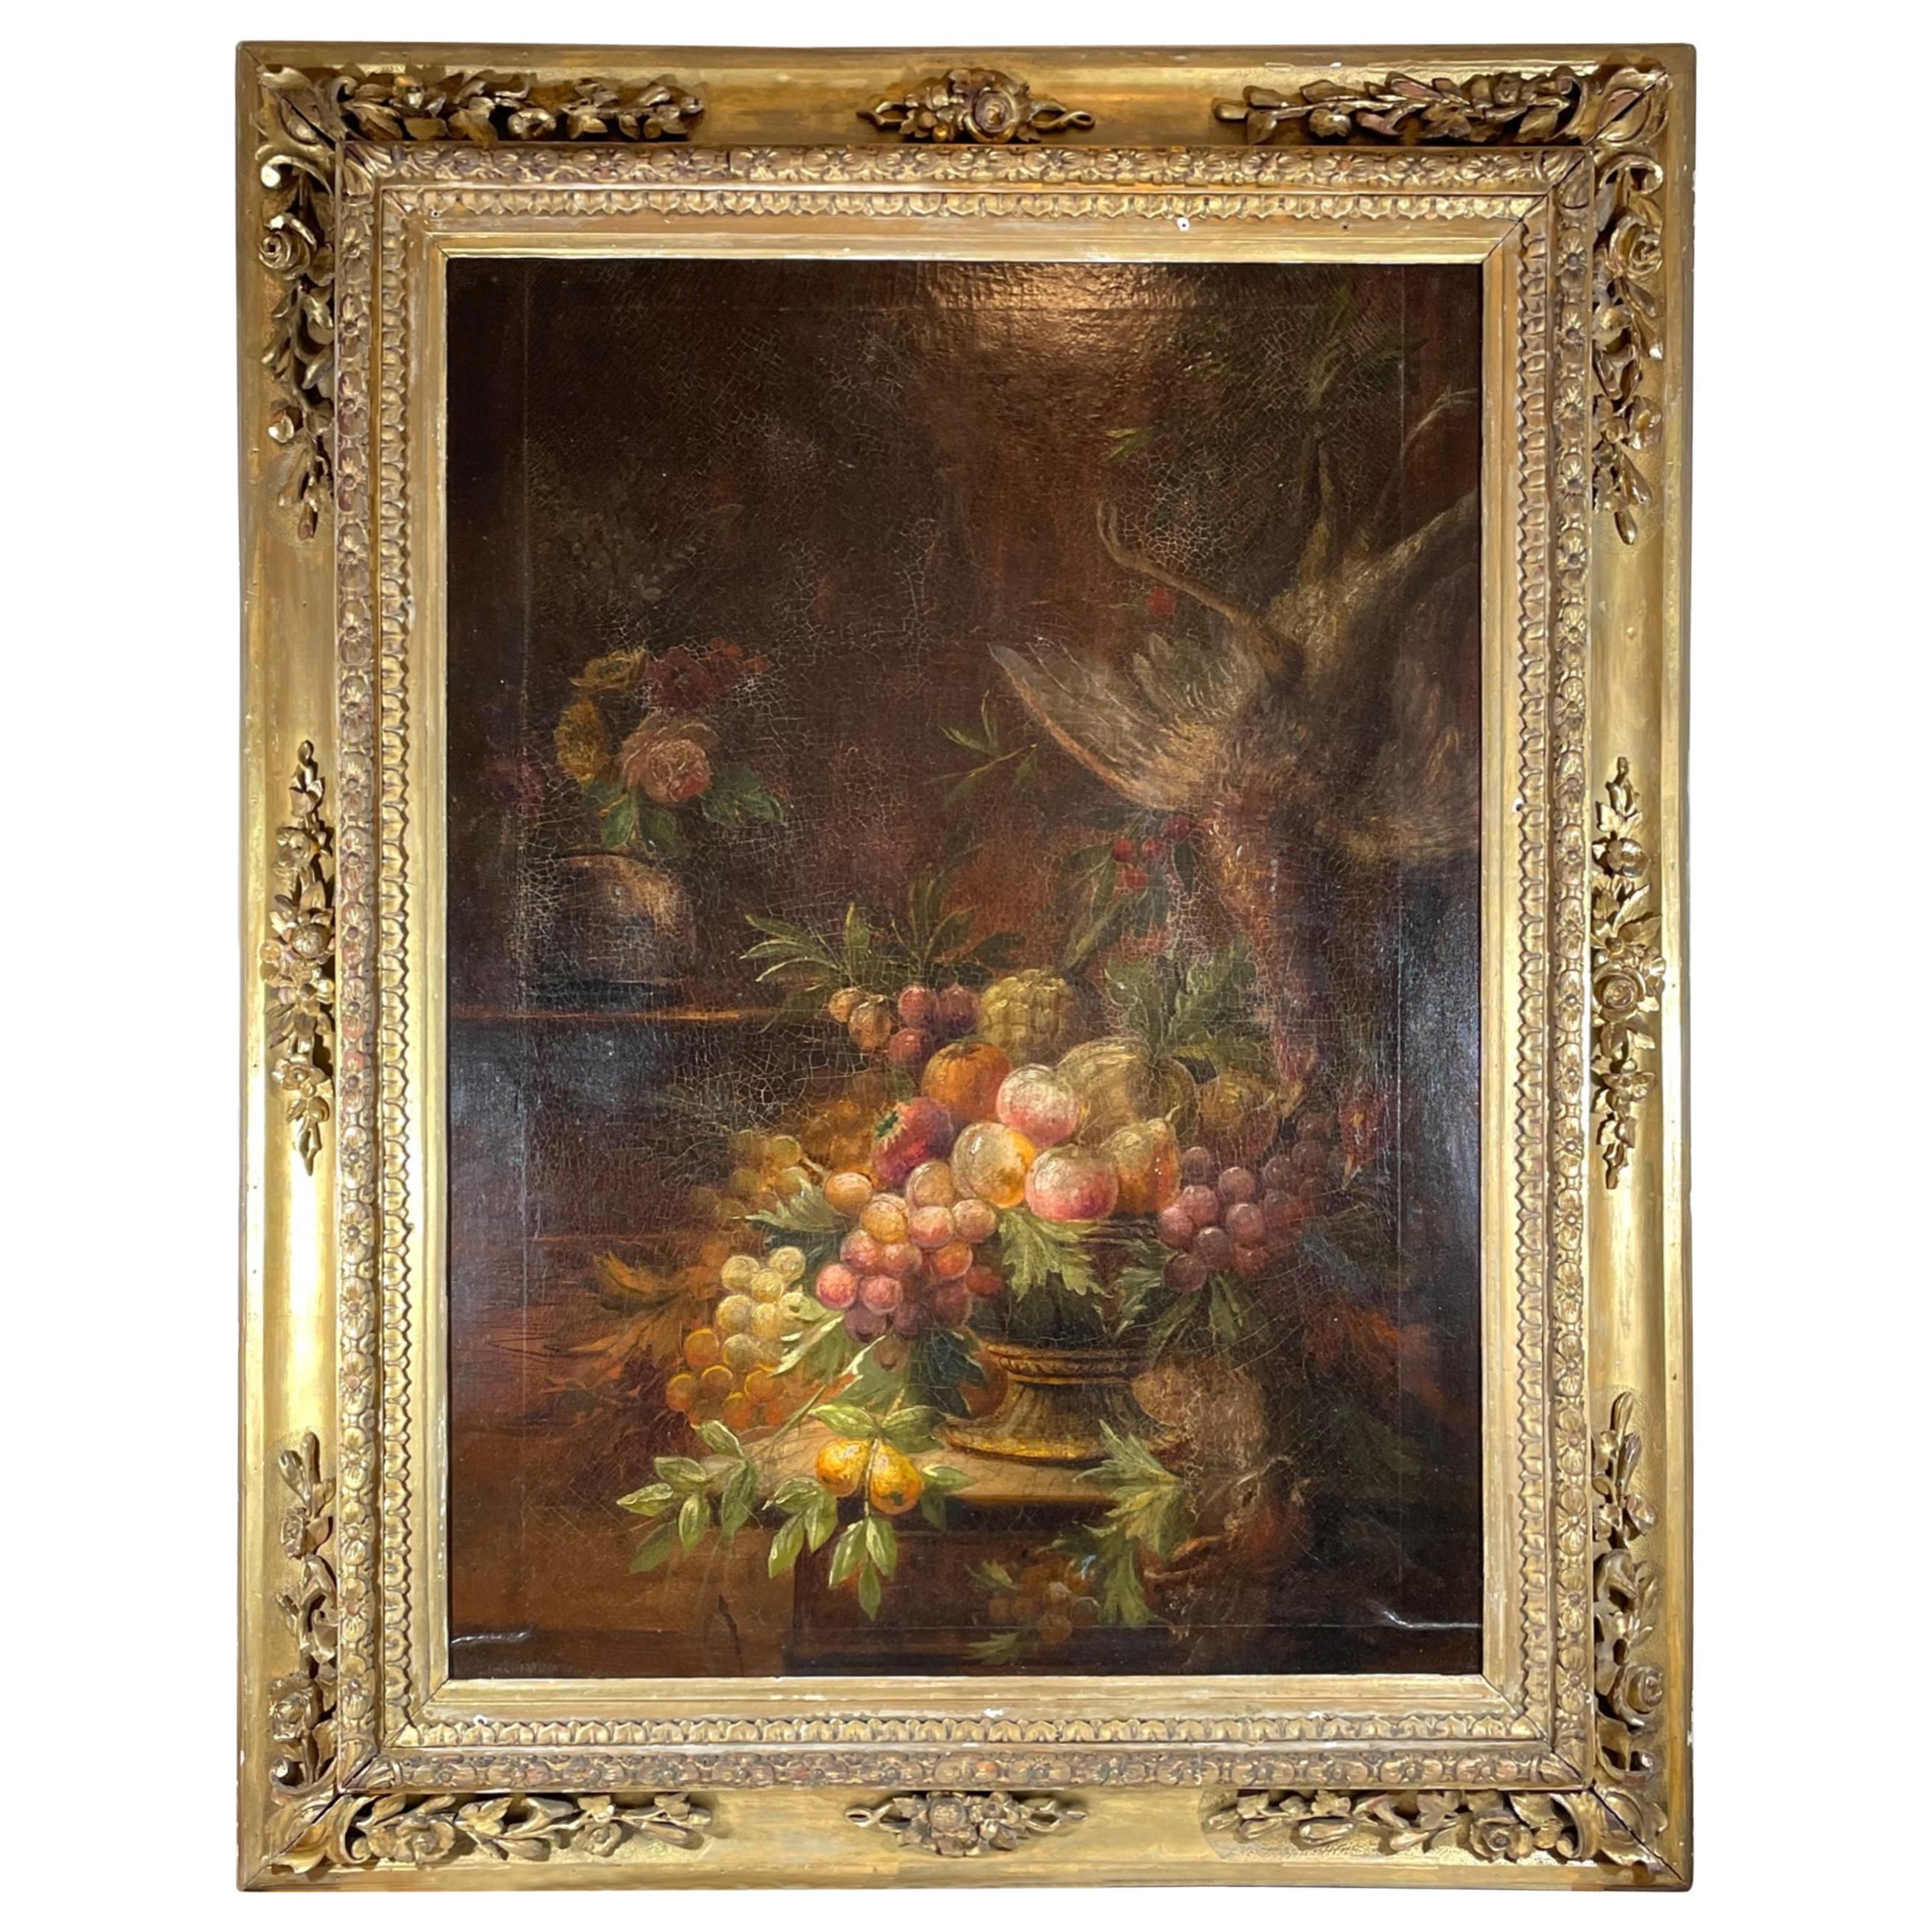 Italian 17th Century Still Life Painting in Period Carved Gilt Frame For Sale